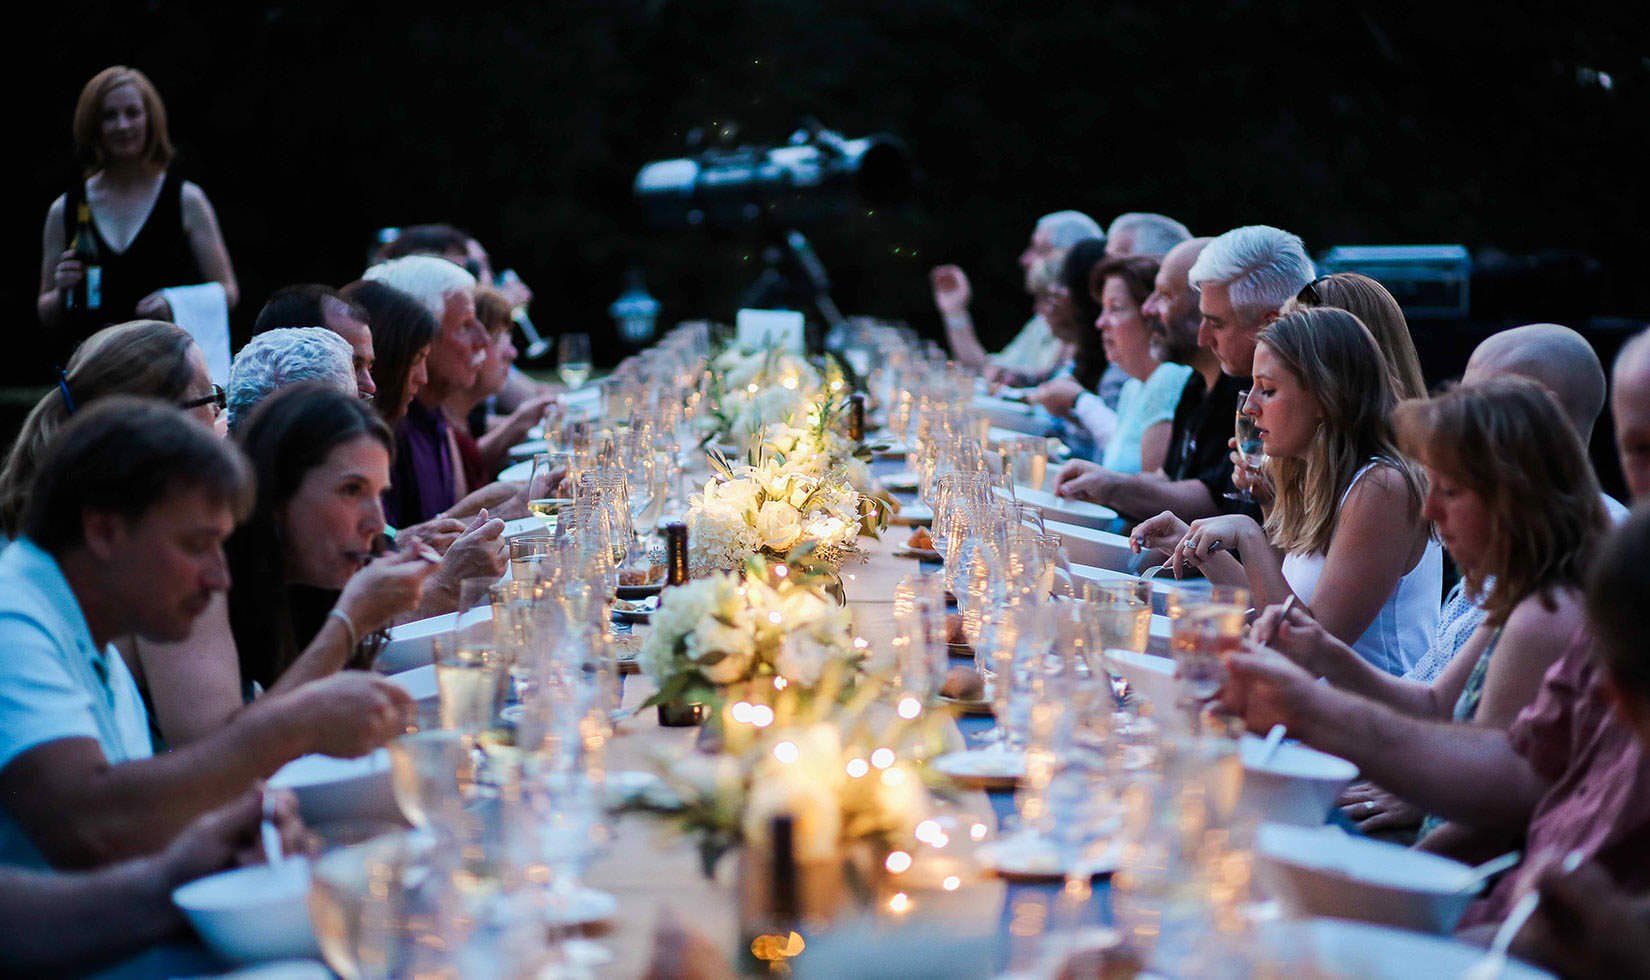 Guests seated at a large alfresco dining table at the Starlight Supper: Perseids Stargazing event. Candles and small white bouquets line the table.